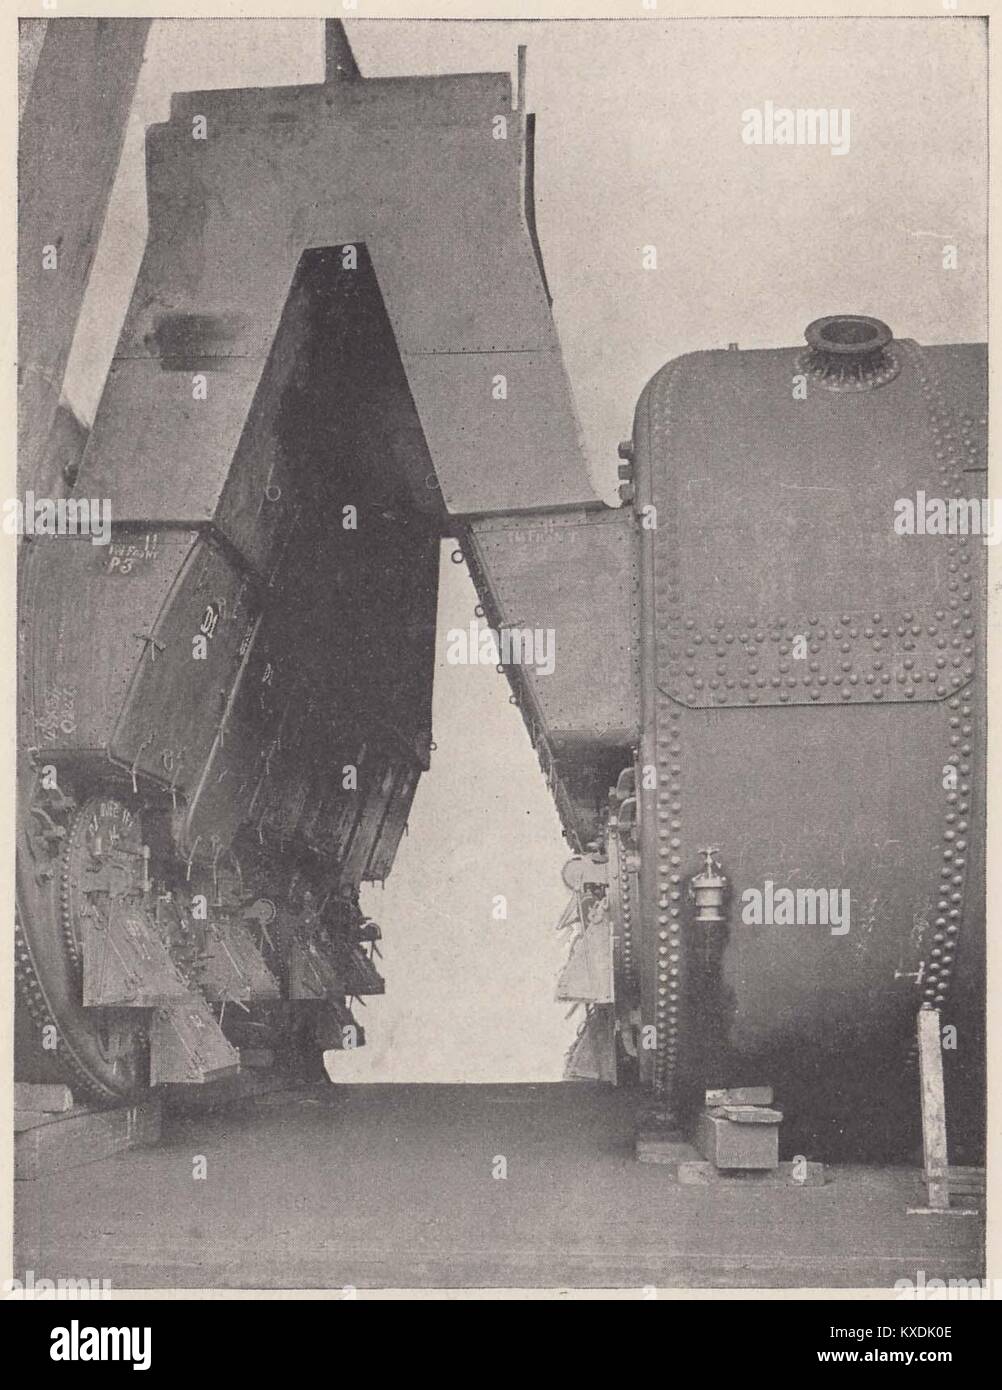 Boilers of the Maine - The photograph was taken with al view to showing the up-takes which are clearly outlined Stock Photo